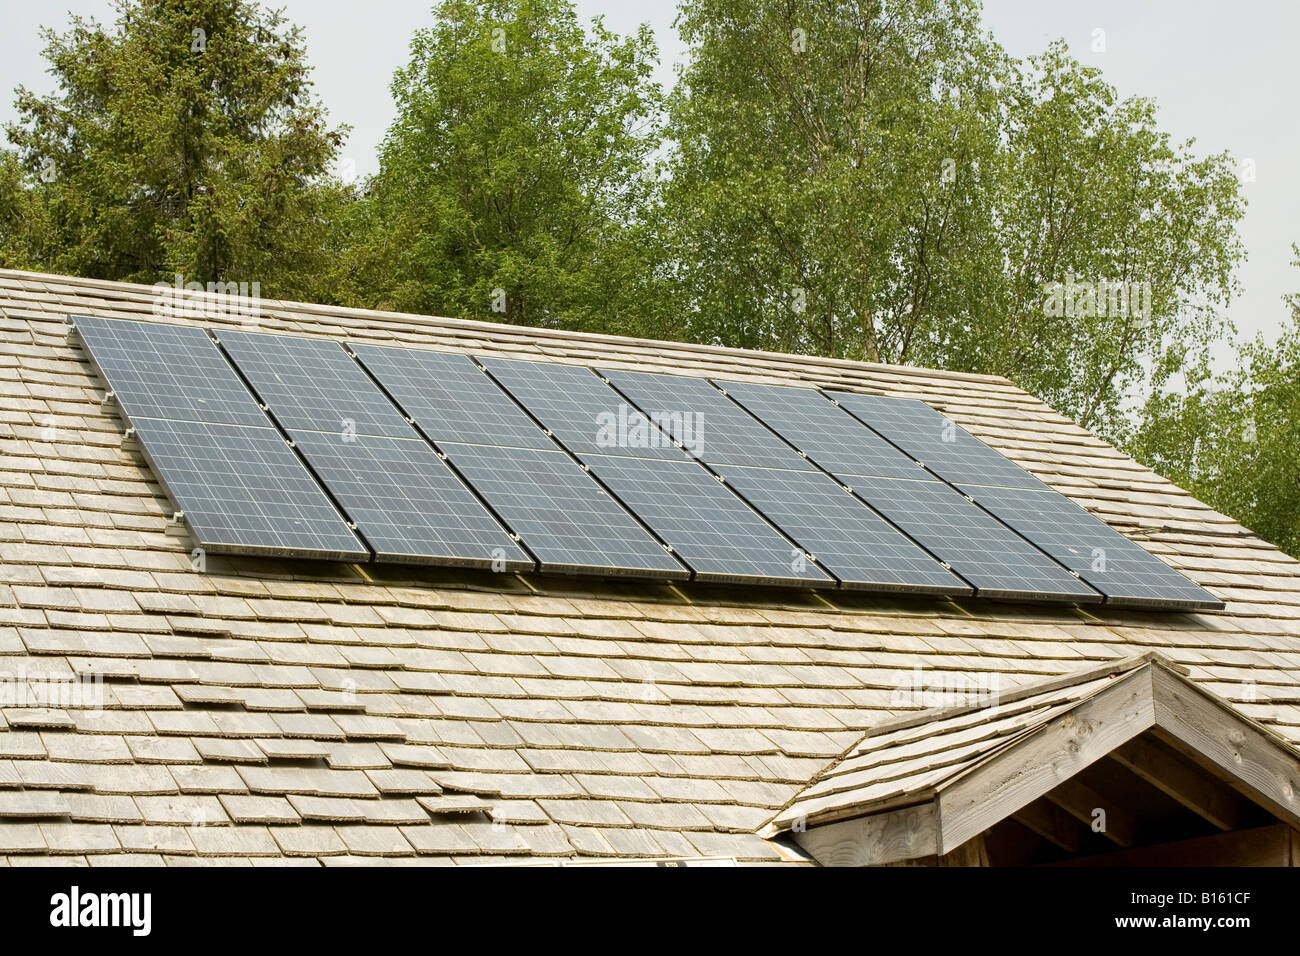 Seven solar PV panels on wood shingle roof Centre for Alternative Technology Machynlleth Powys Wales UK Stock Photo